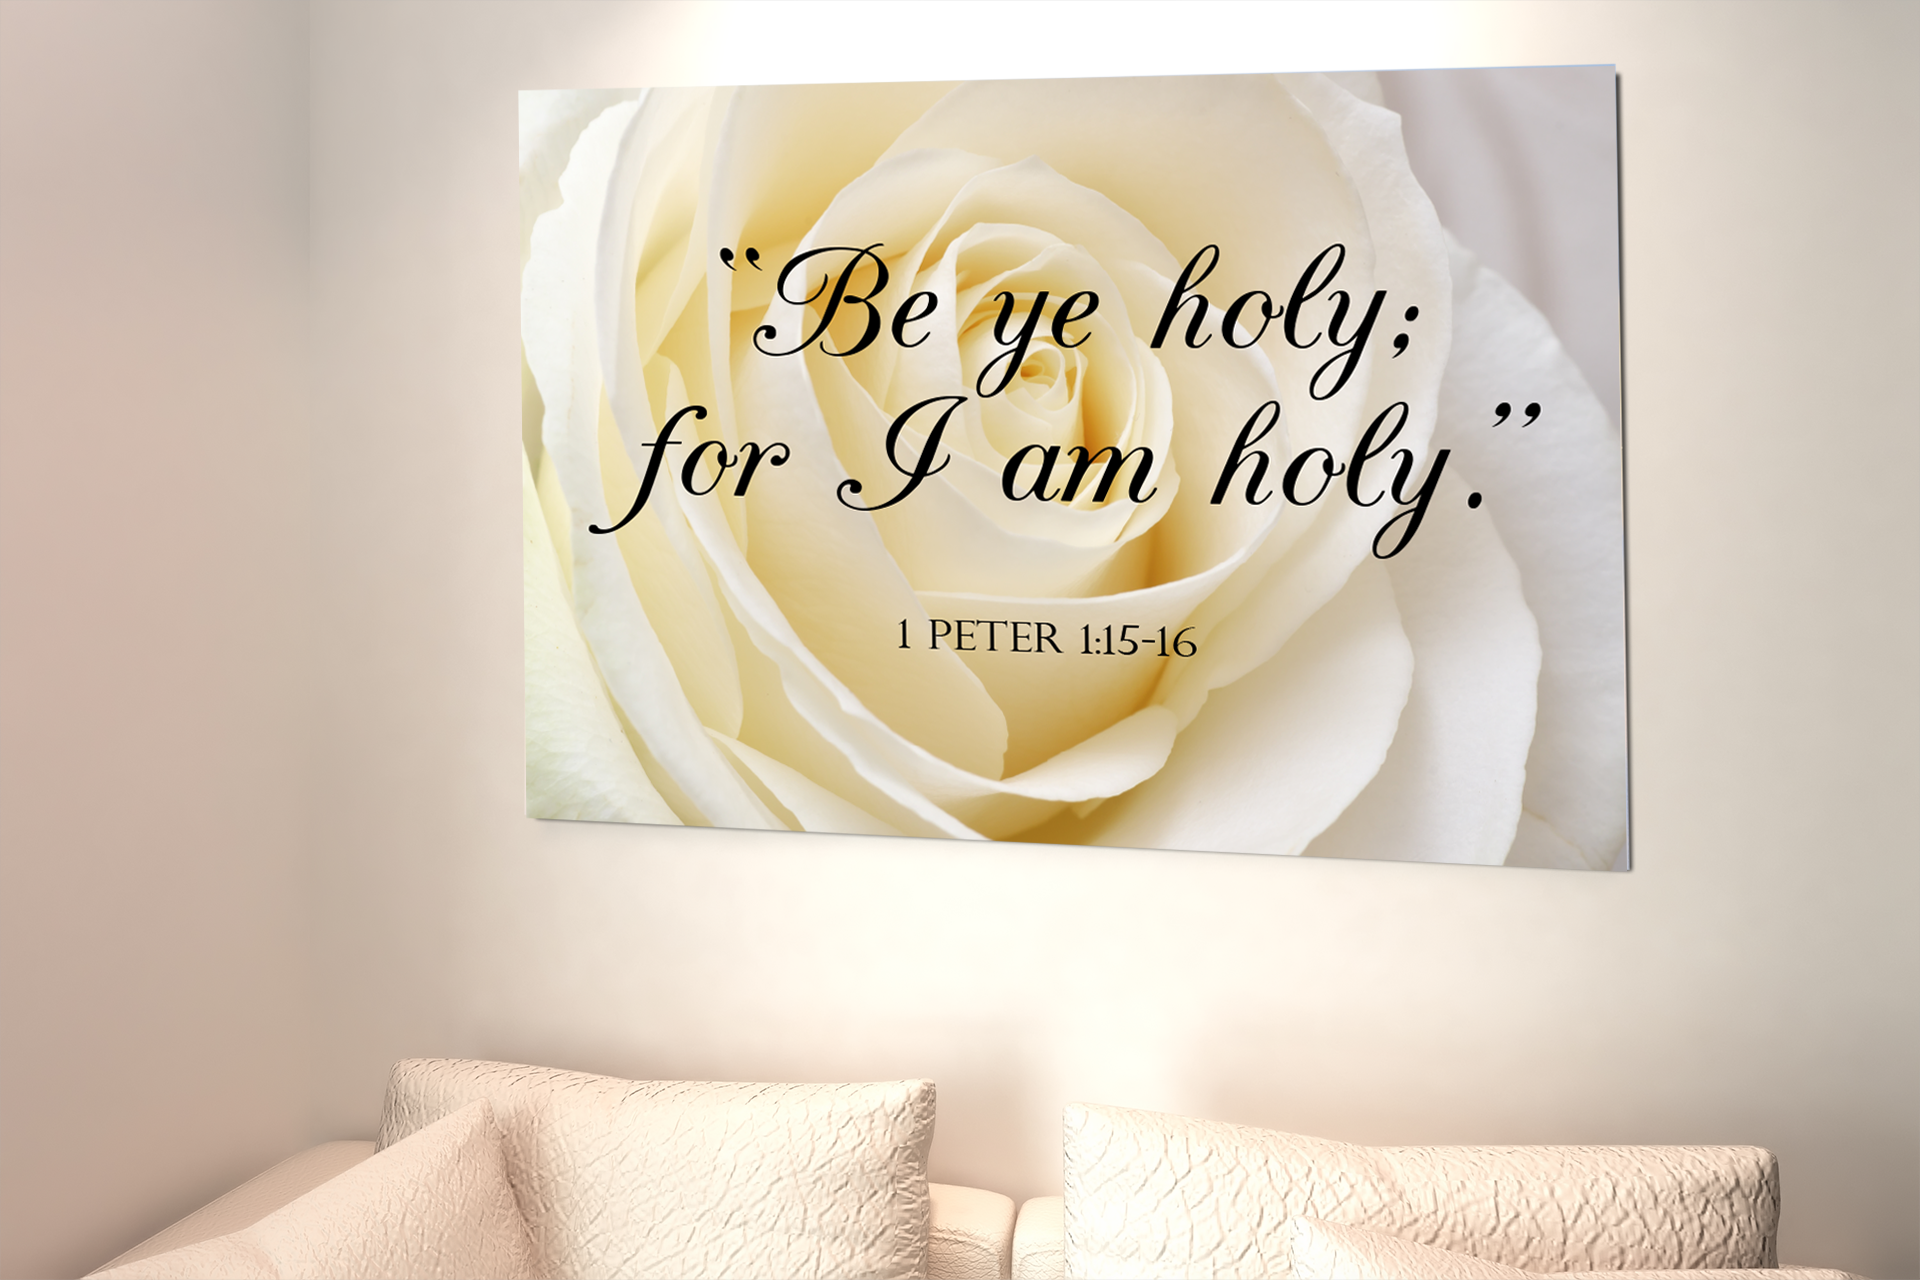 Scripture Walls Be Holy 1 Peter 1:15-16 Bible Verse Canvas Christian Wall Art Ready to Hang Unframed-Express Your Love Gifts